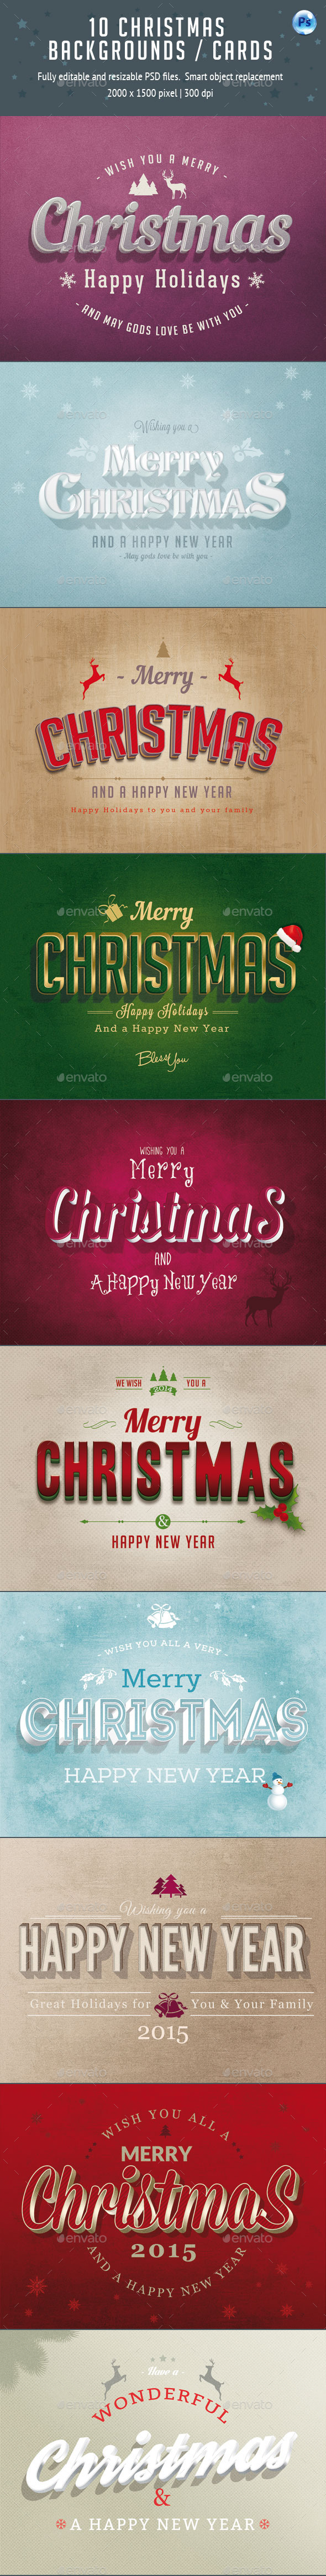 10 Christmas Cards / Backgrounds